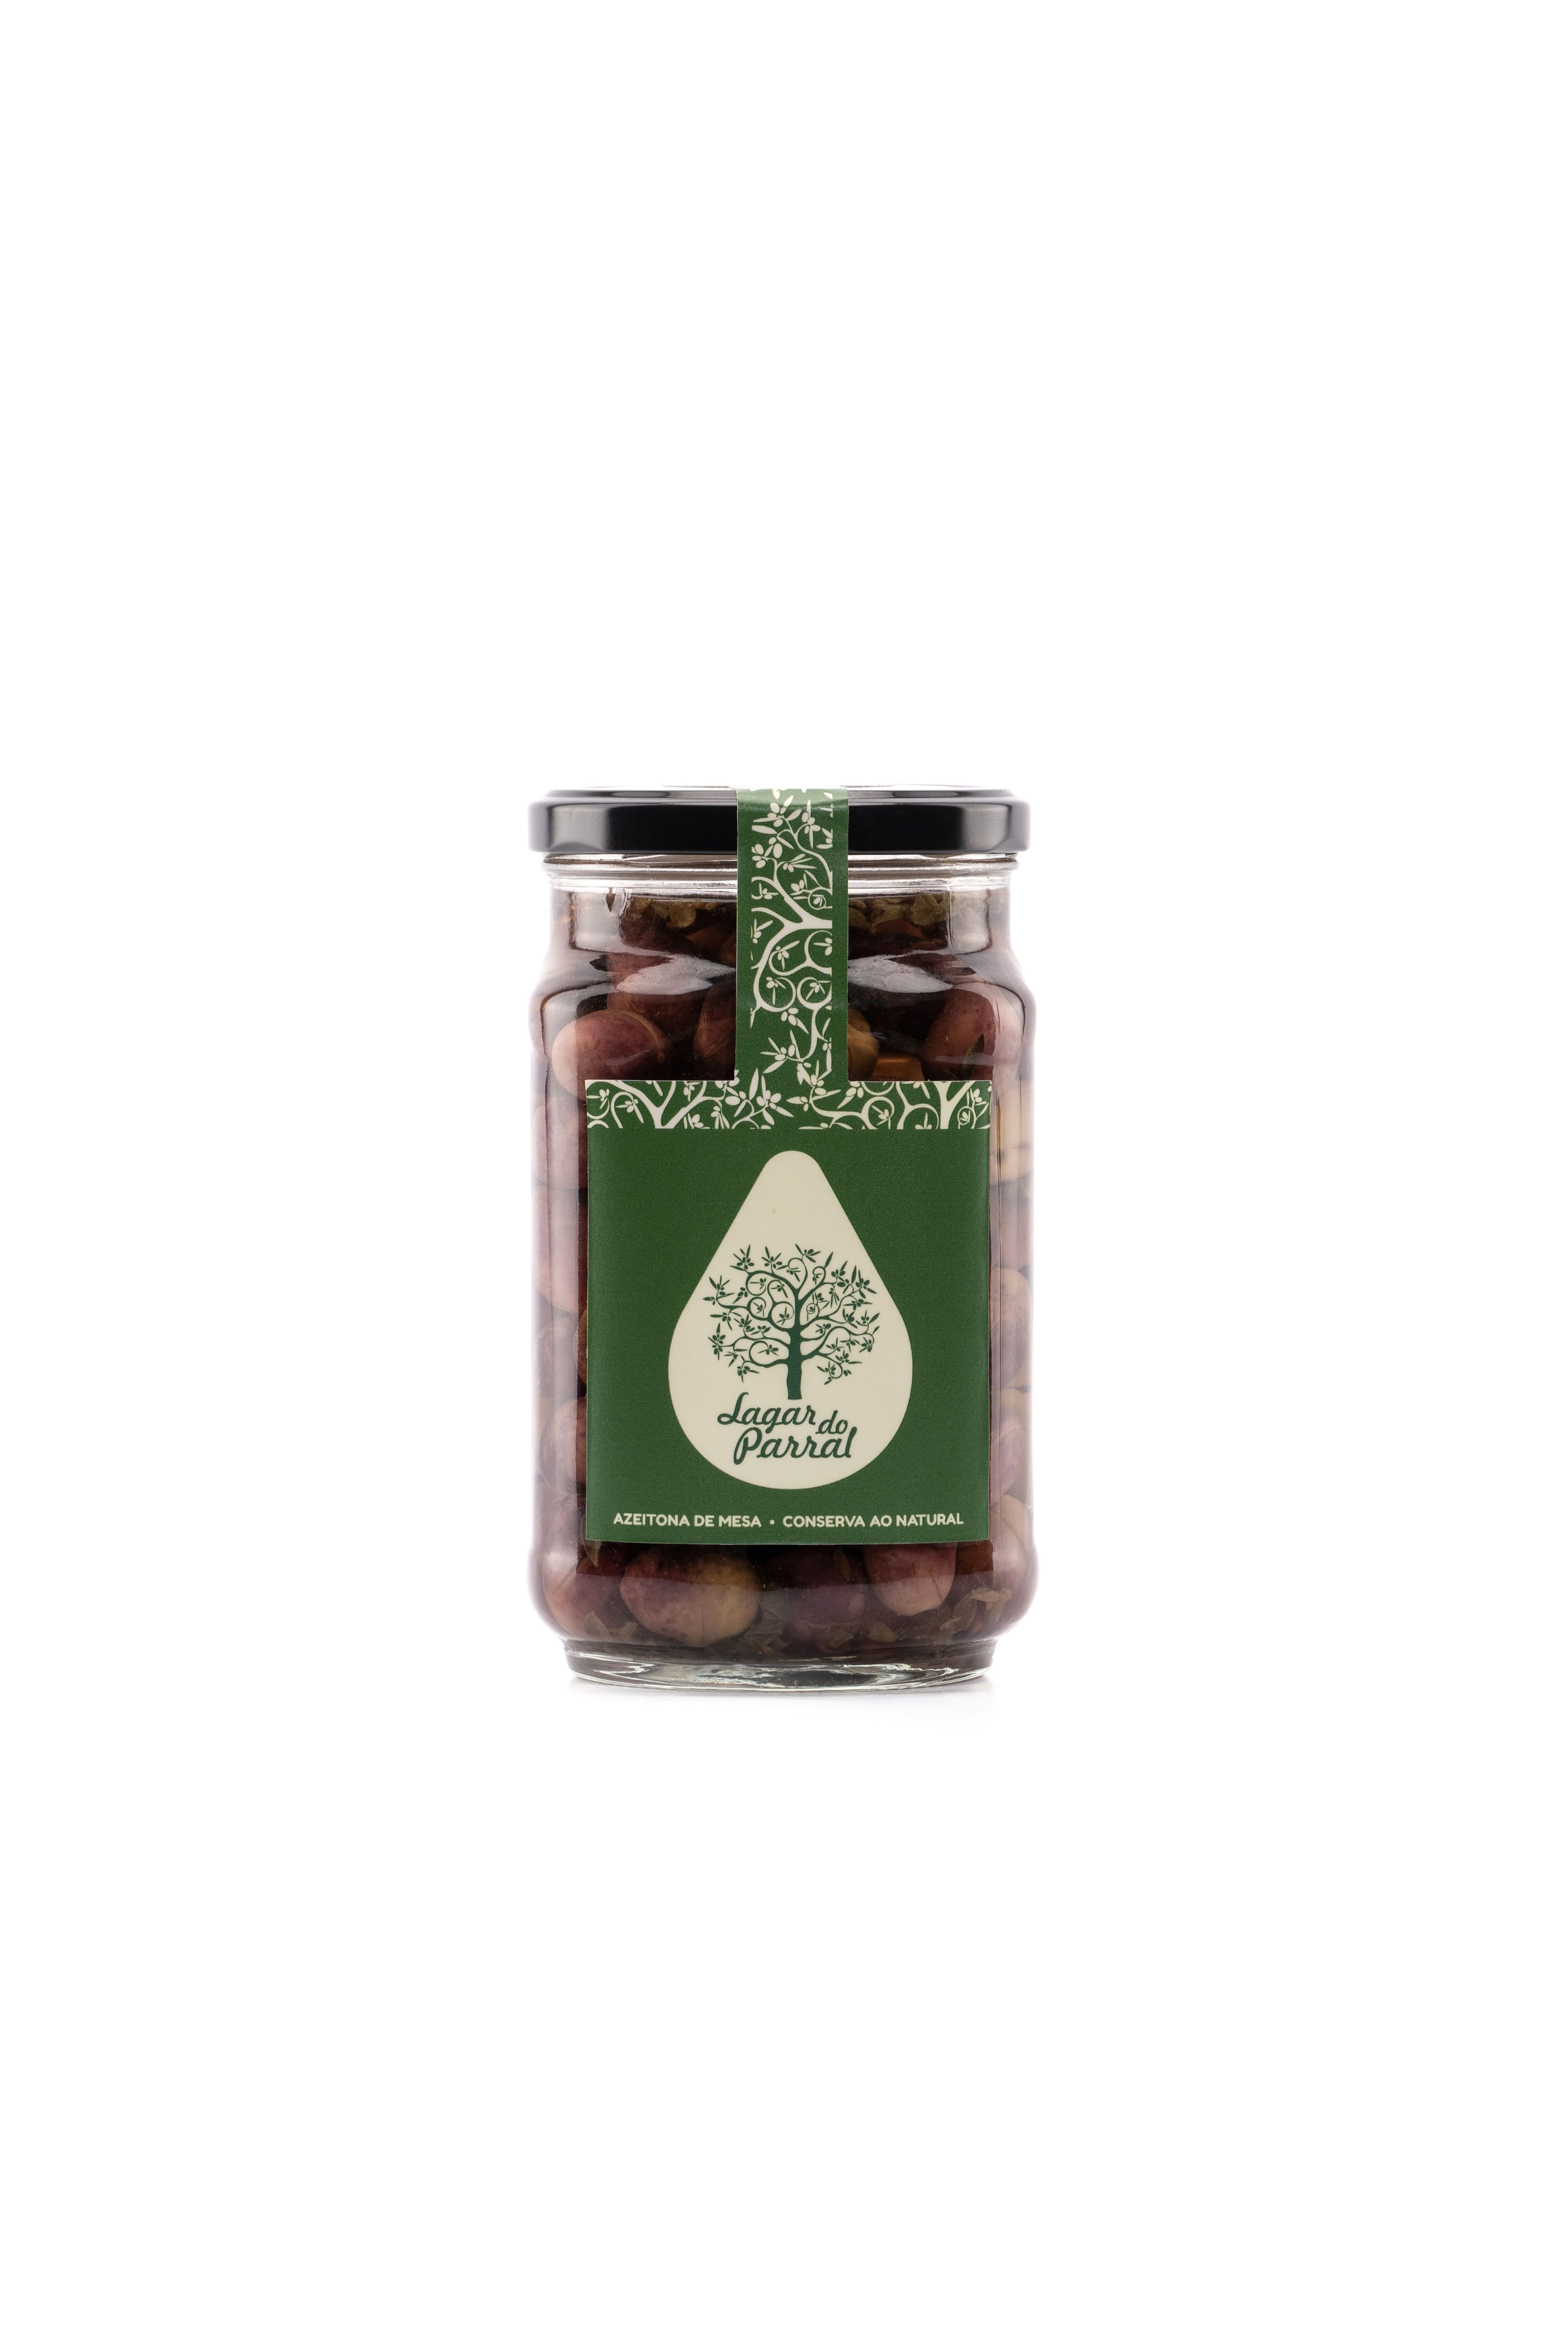 Table olives 350g